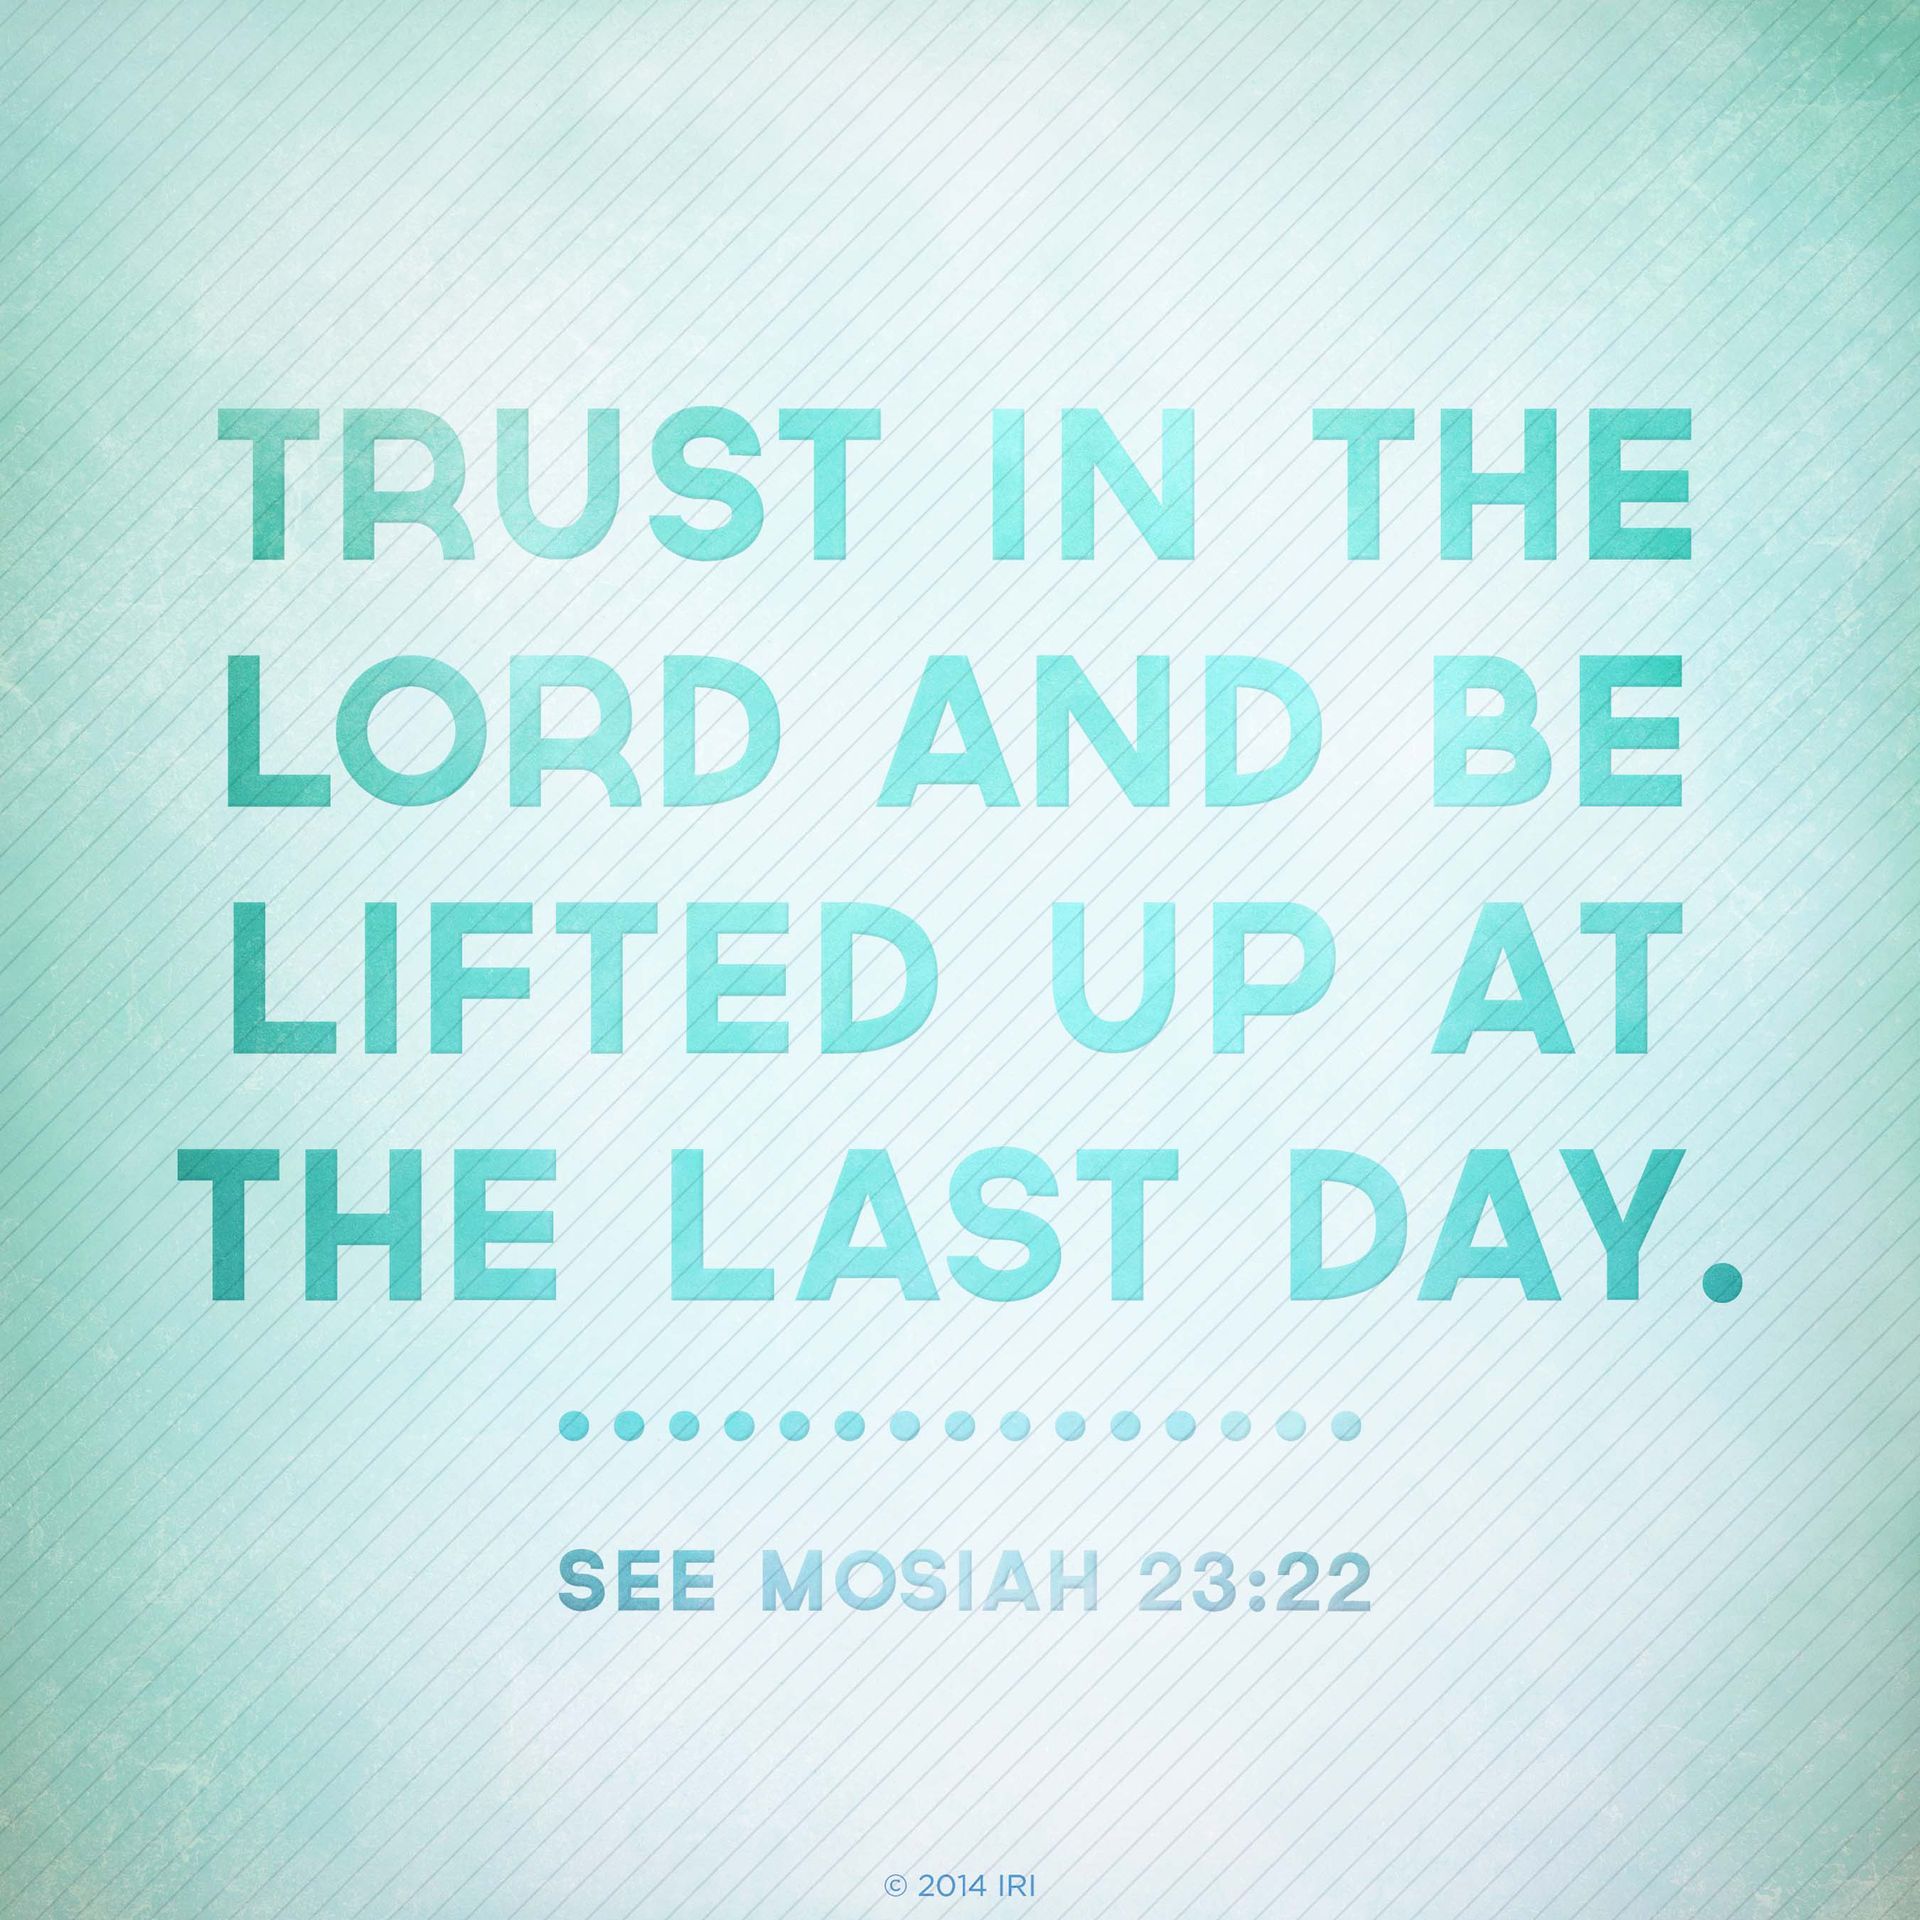 Trust in the Lord and be lifted up at the last day.—See Mosiah 23:22